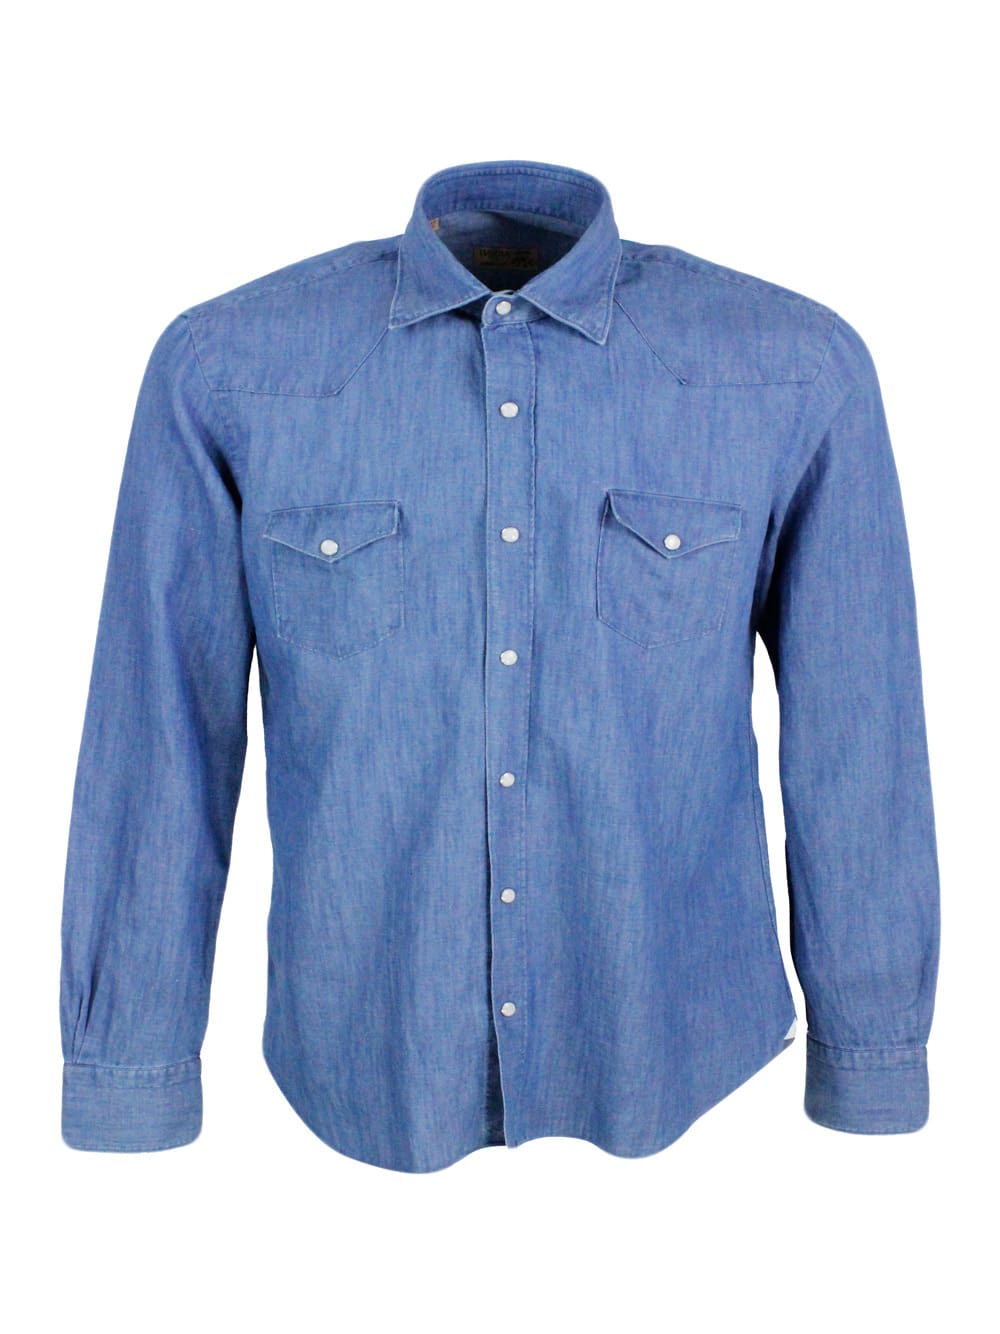 Shop Barba Napoli Dandylife Shirt In Light Denim With Hand-stitched Italian Collar And Front Pocket Counters. The Butt